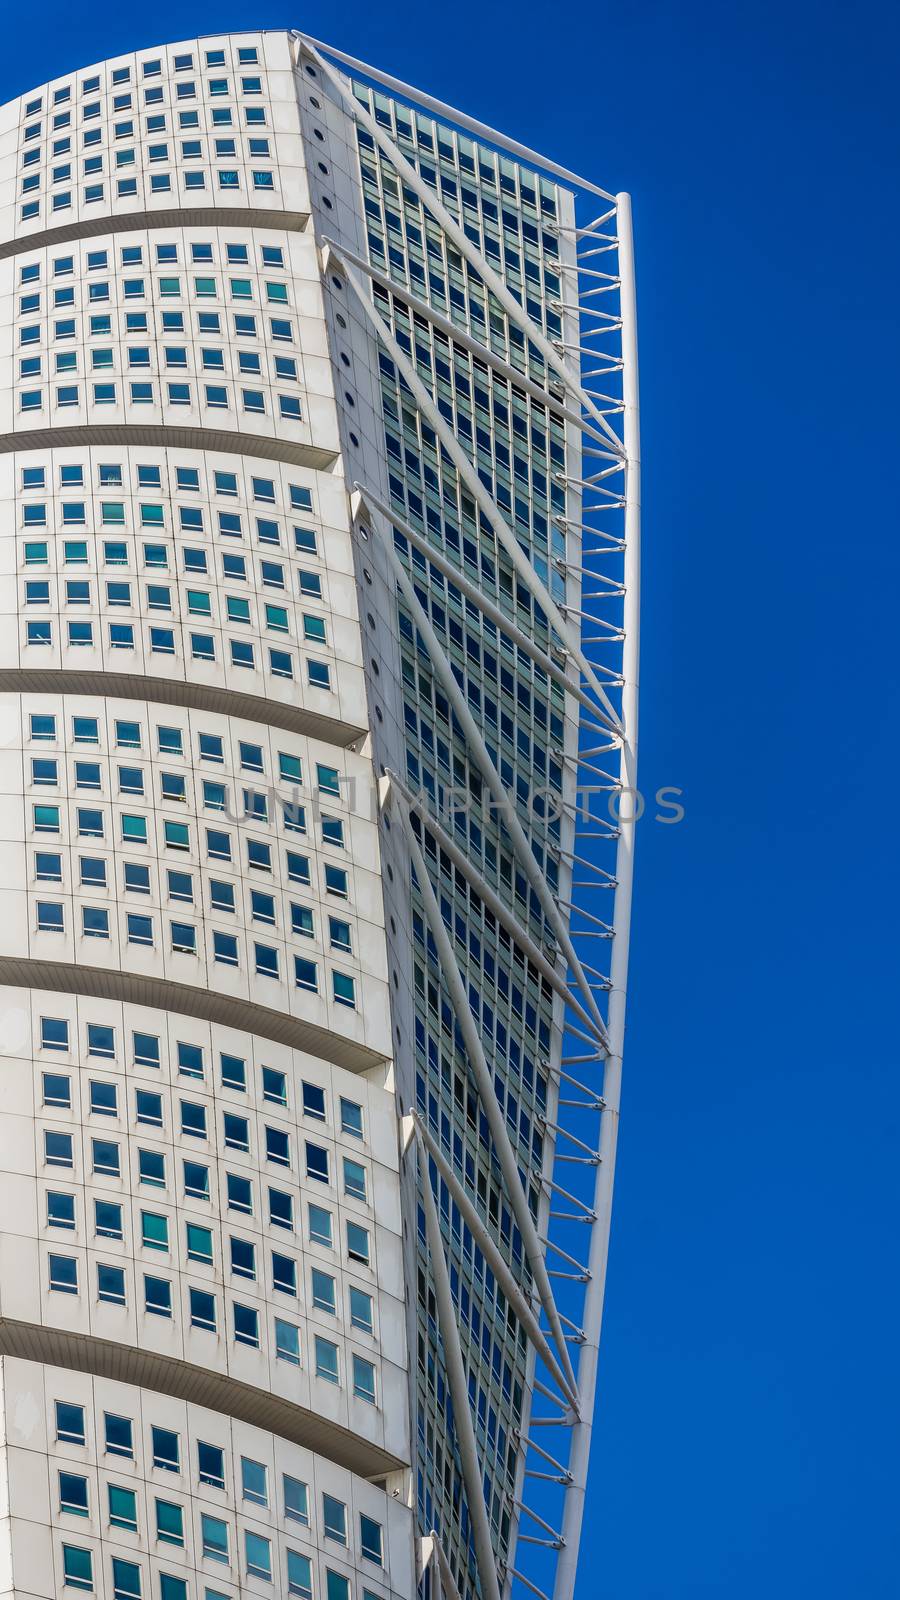 HSB Turning Torso in Malmo, the tallest tower in Scandinavia at 190 m high, combines office and residential functions. Designed by the Spanish architect Santiago Calatrava.